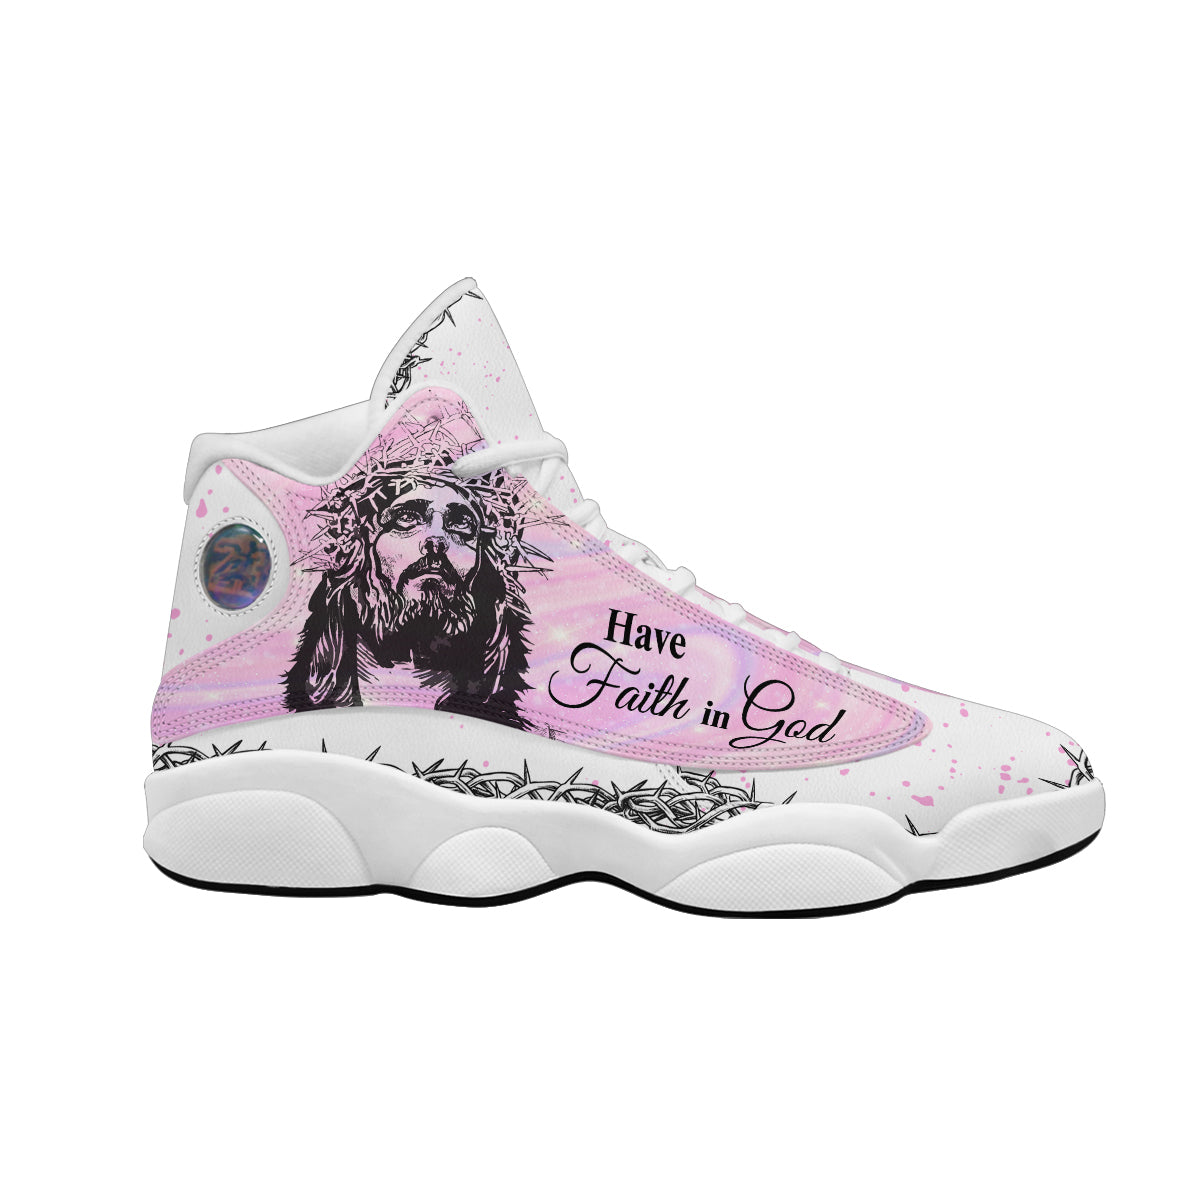 Have Faith In God Jesus Basketball Shoes For Men Women - Christian Shoes - Jesus Shoes - Unisex Basketball Shoes